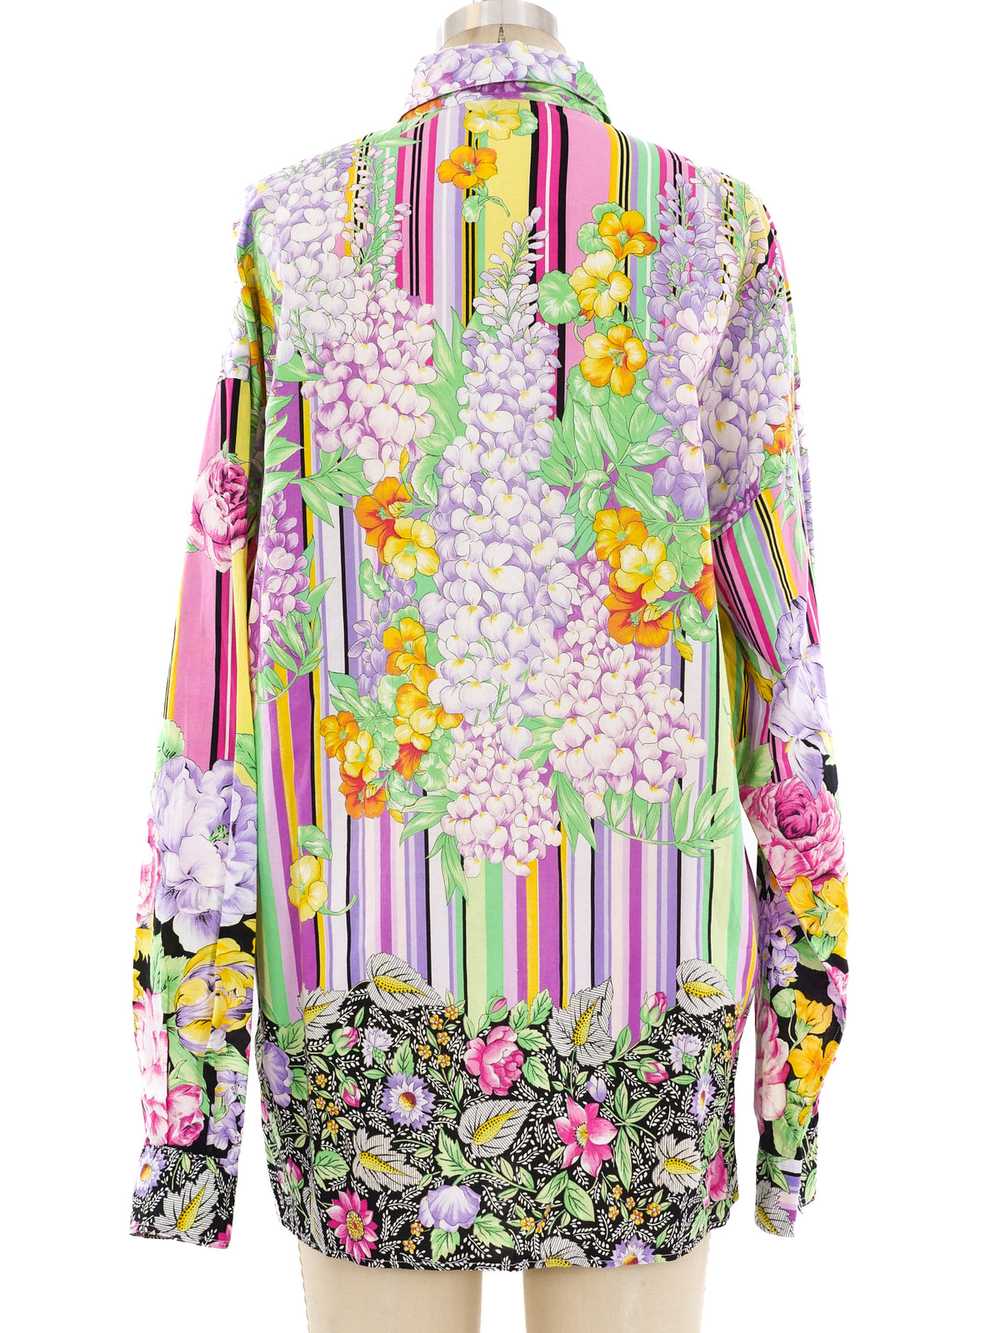 Versus by Gianni Versace Floral Printed Shirt - image 4